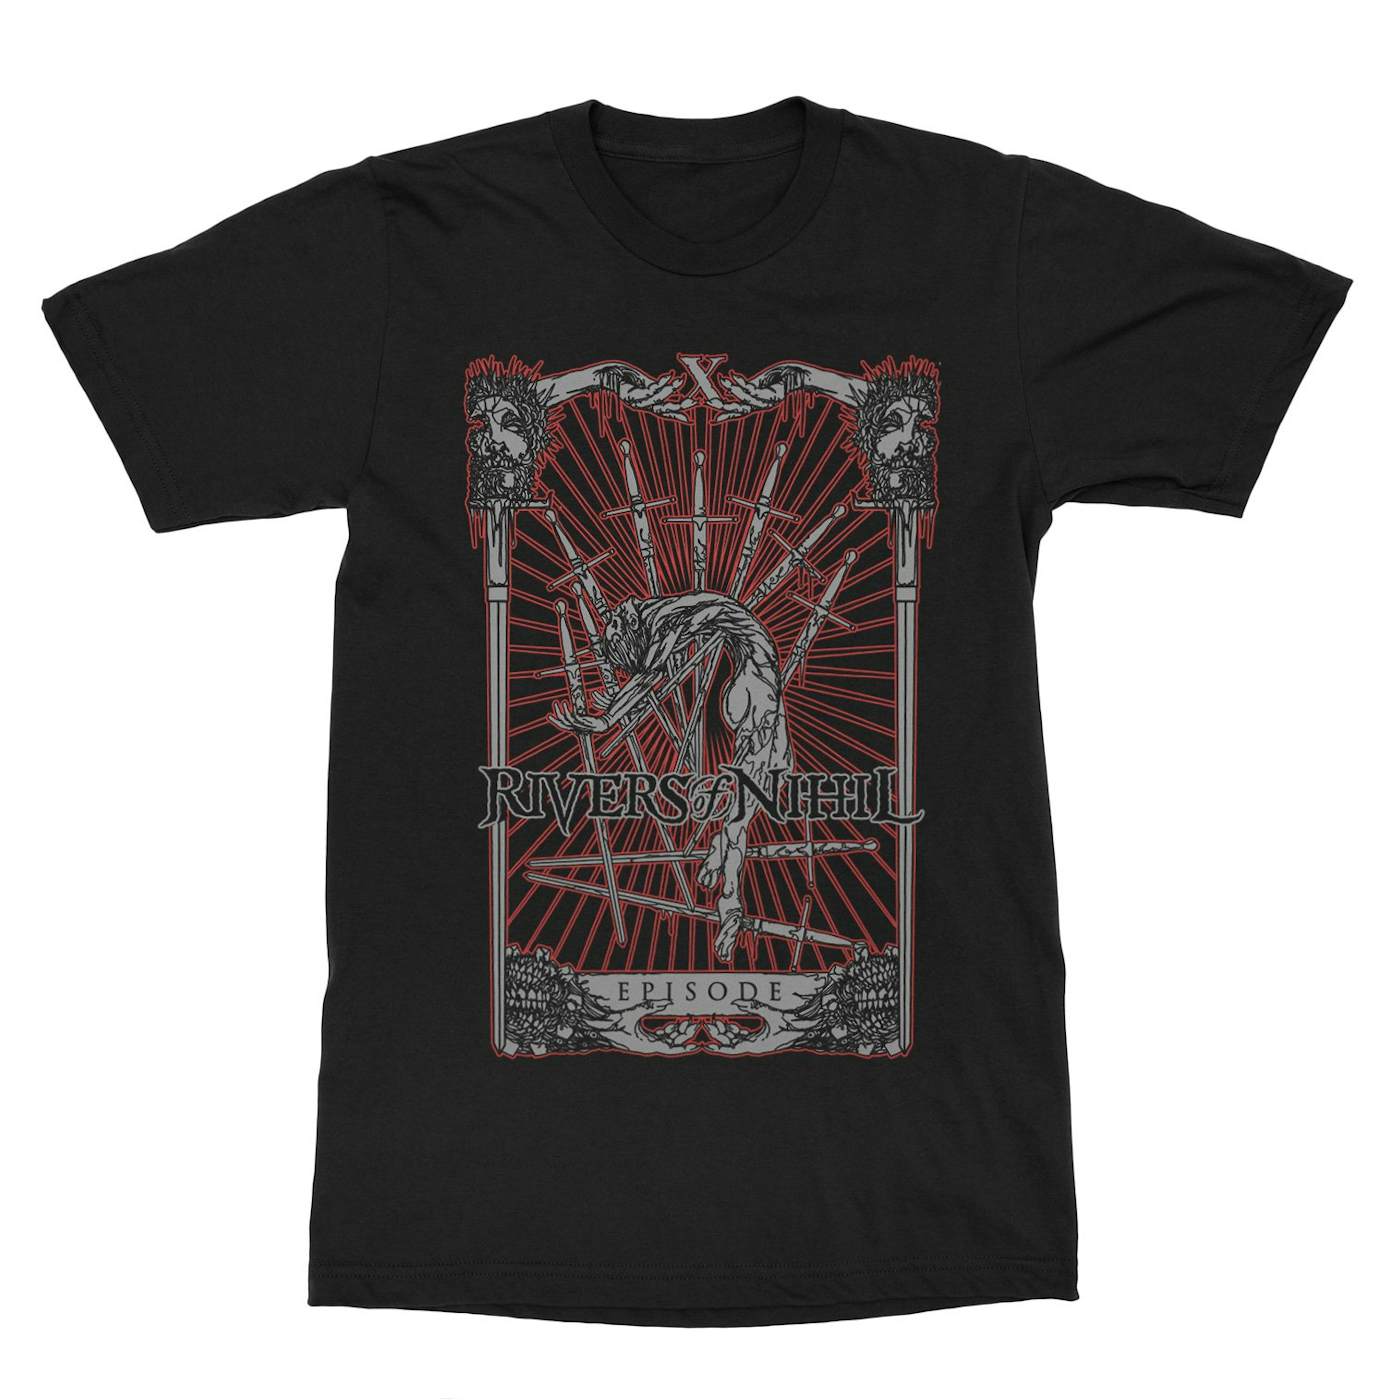 Rivers of Nihil "Episode" T-Shirt